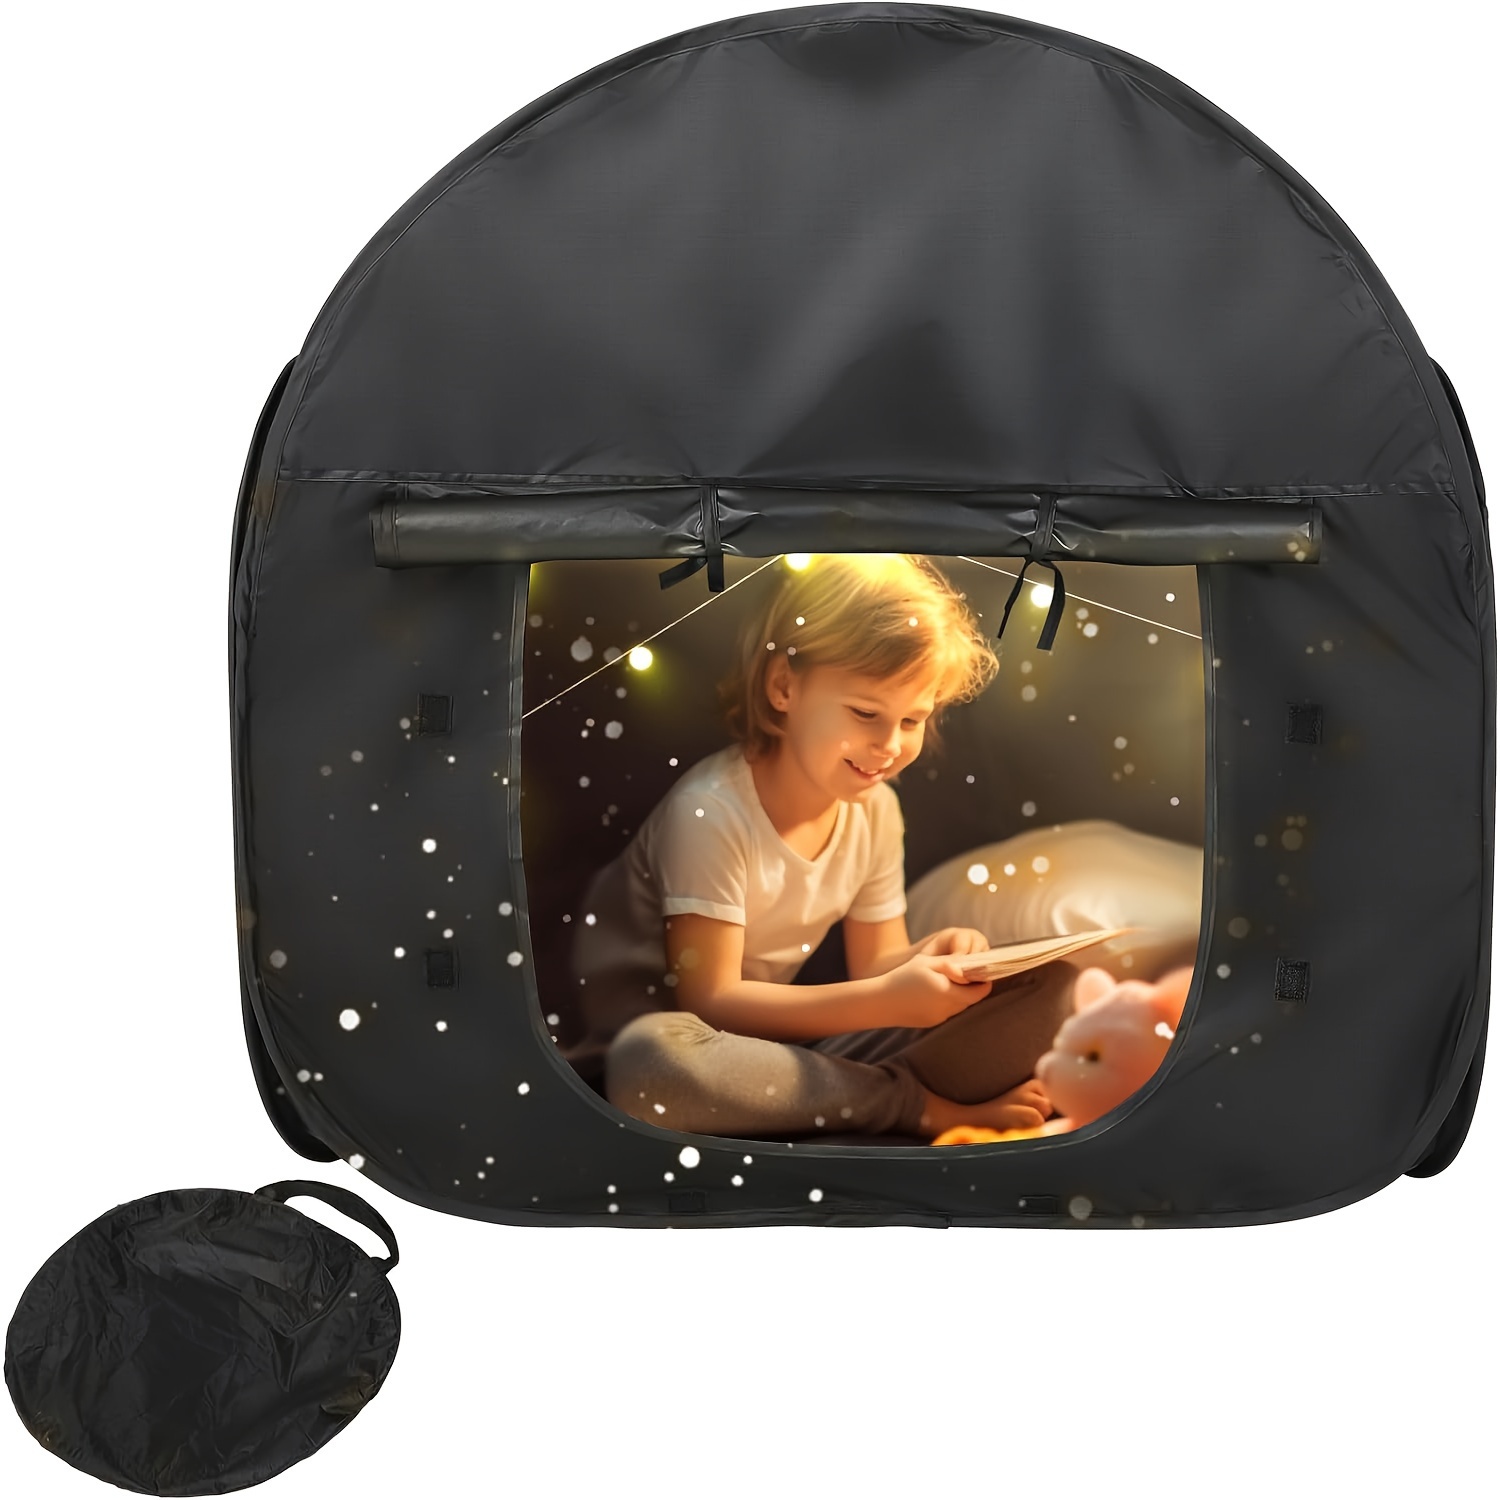 

Sensory Tent Calming Hideout For Children With Autism, Pop-up Blackout Tent Black, Sensory Play Tent Sensory Den, Special Needs Sensory Tent|suitable For: Spd, Anxiety, Adhd, Autism, Etc.